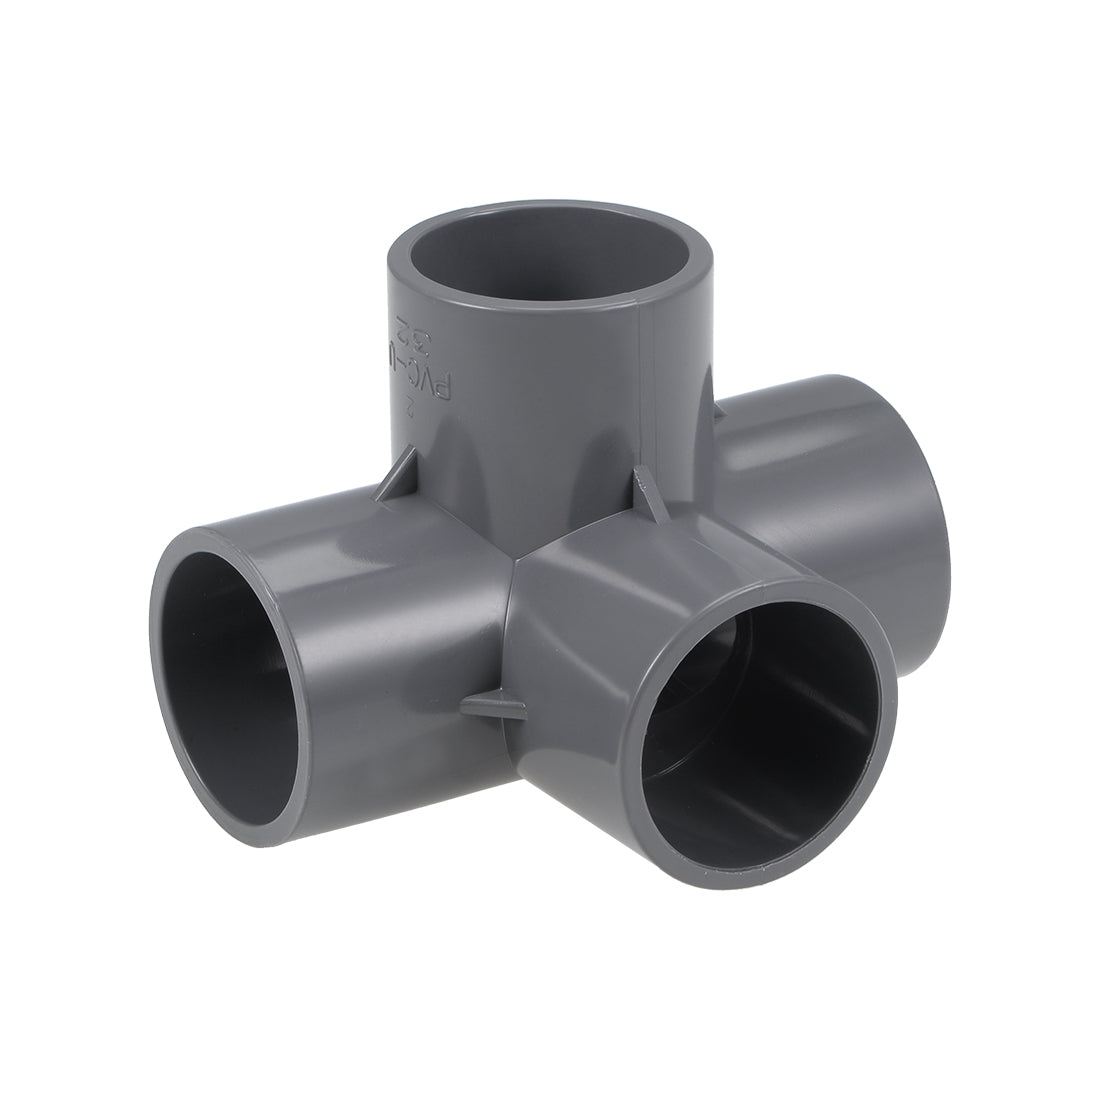 uxcell Uxcell 4 Way 32mm Tee Metric PVC Fitting Elbow - PVC Furniture - PVC Elbow Fittings Gray 2Pcs